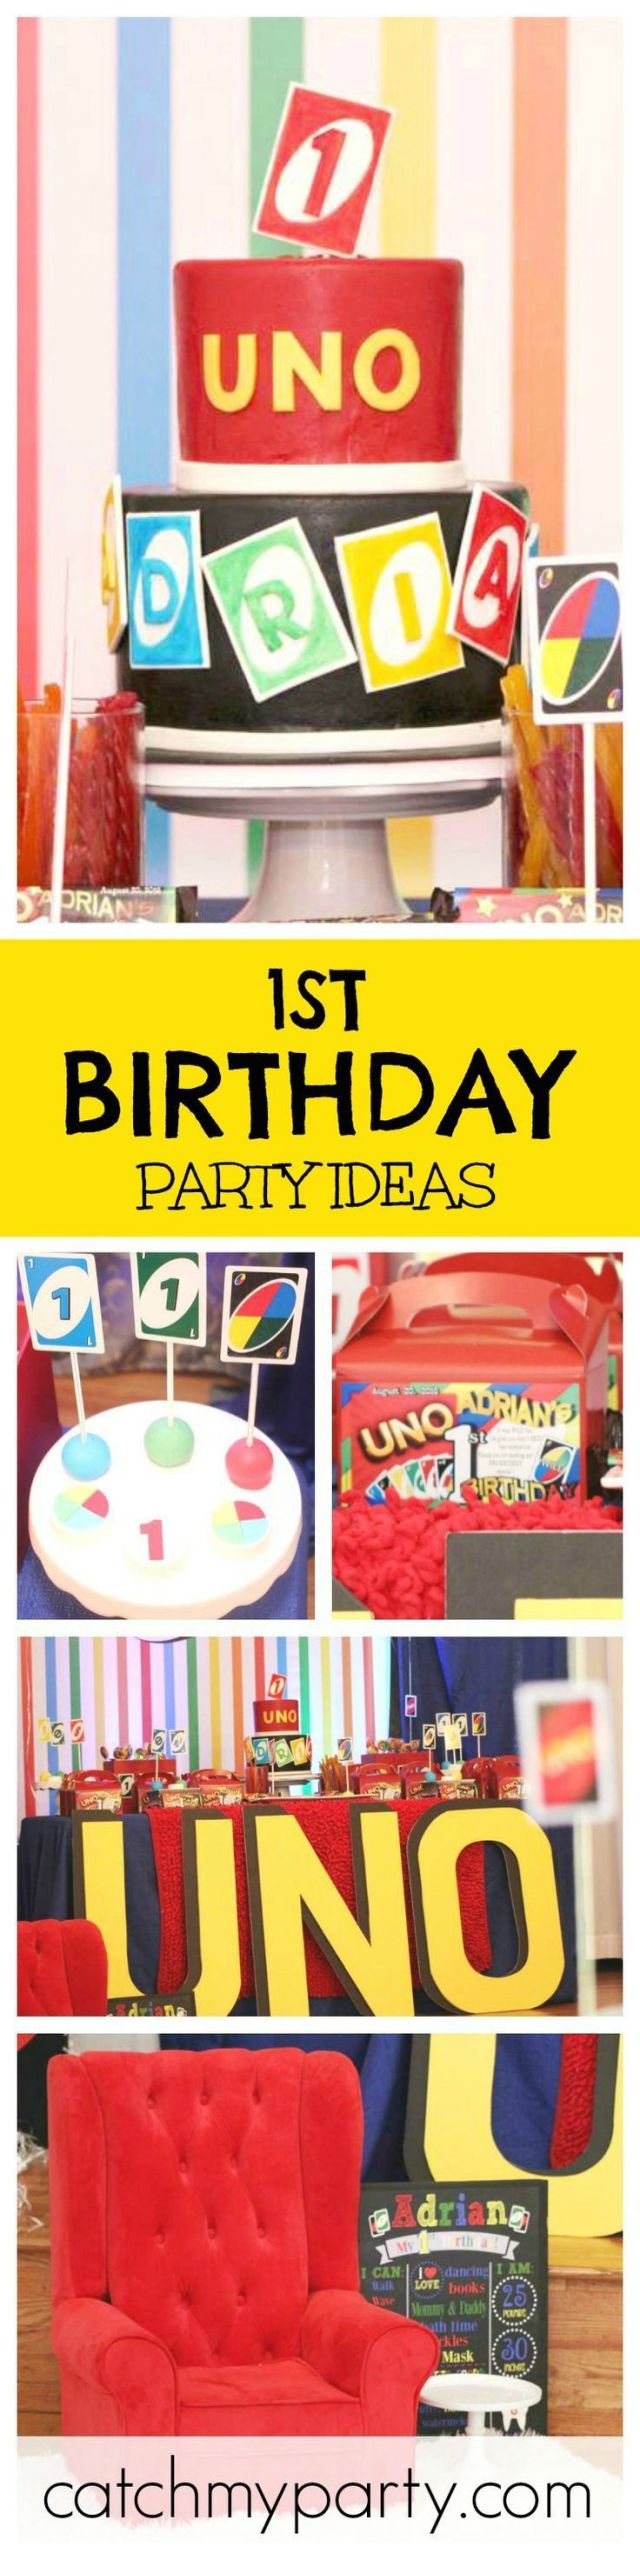 Uno Birthday Party
 33 best Uno Birthday Party images on Pinterest